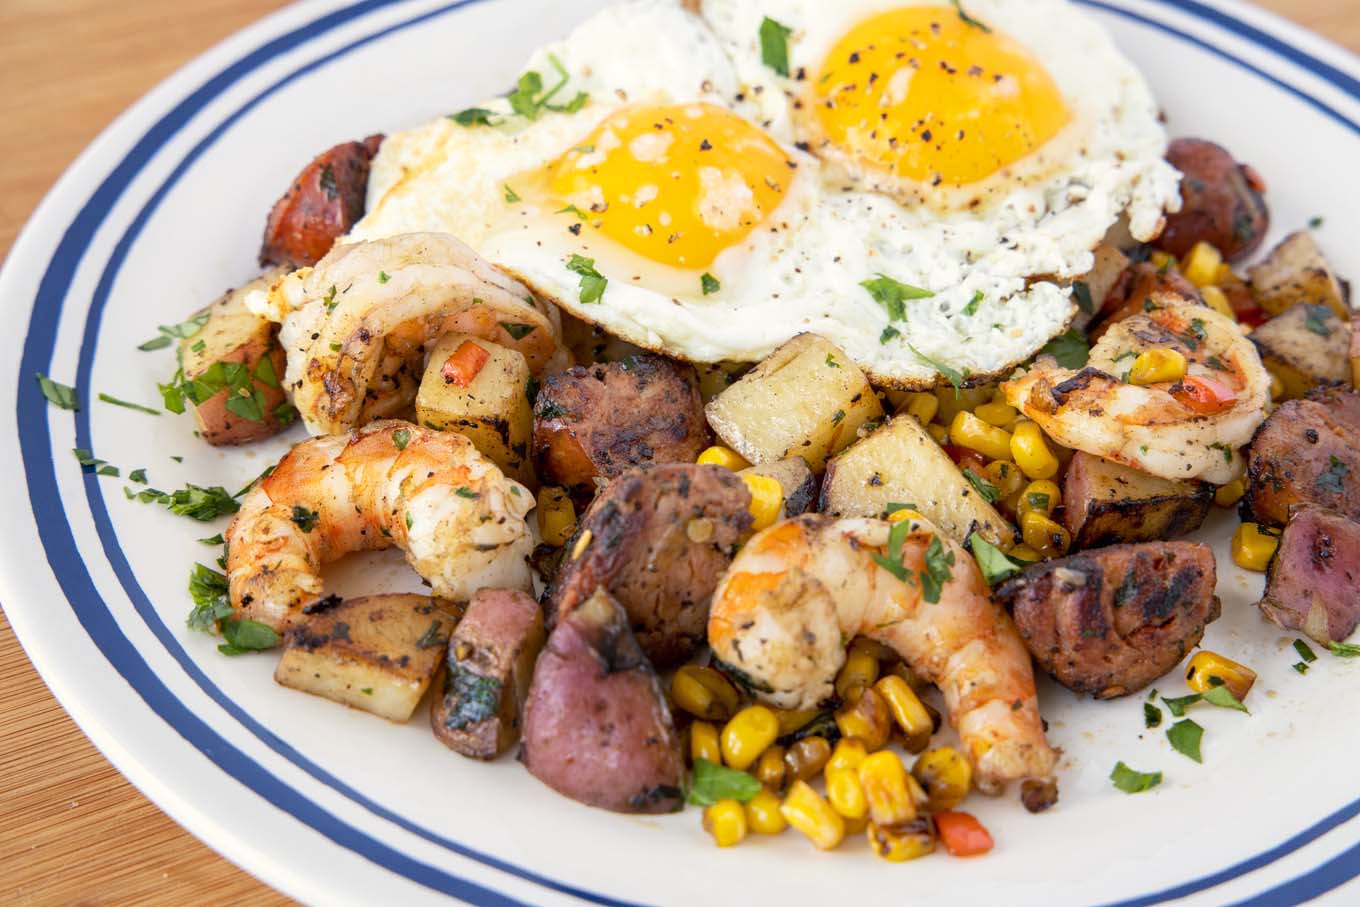 sunny side up eggs on top of the shrimp and potato combination